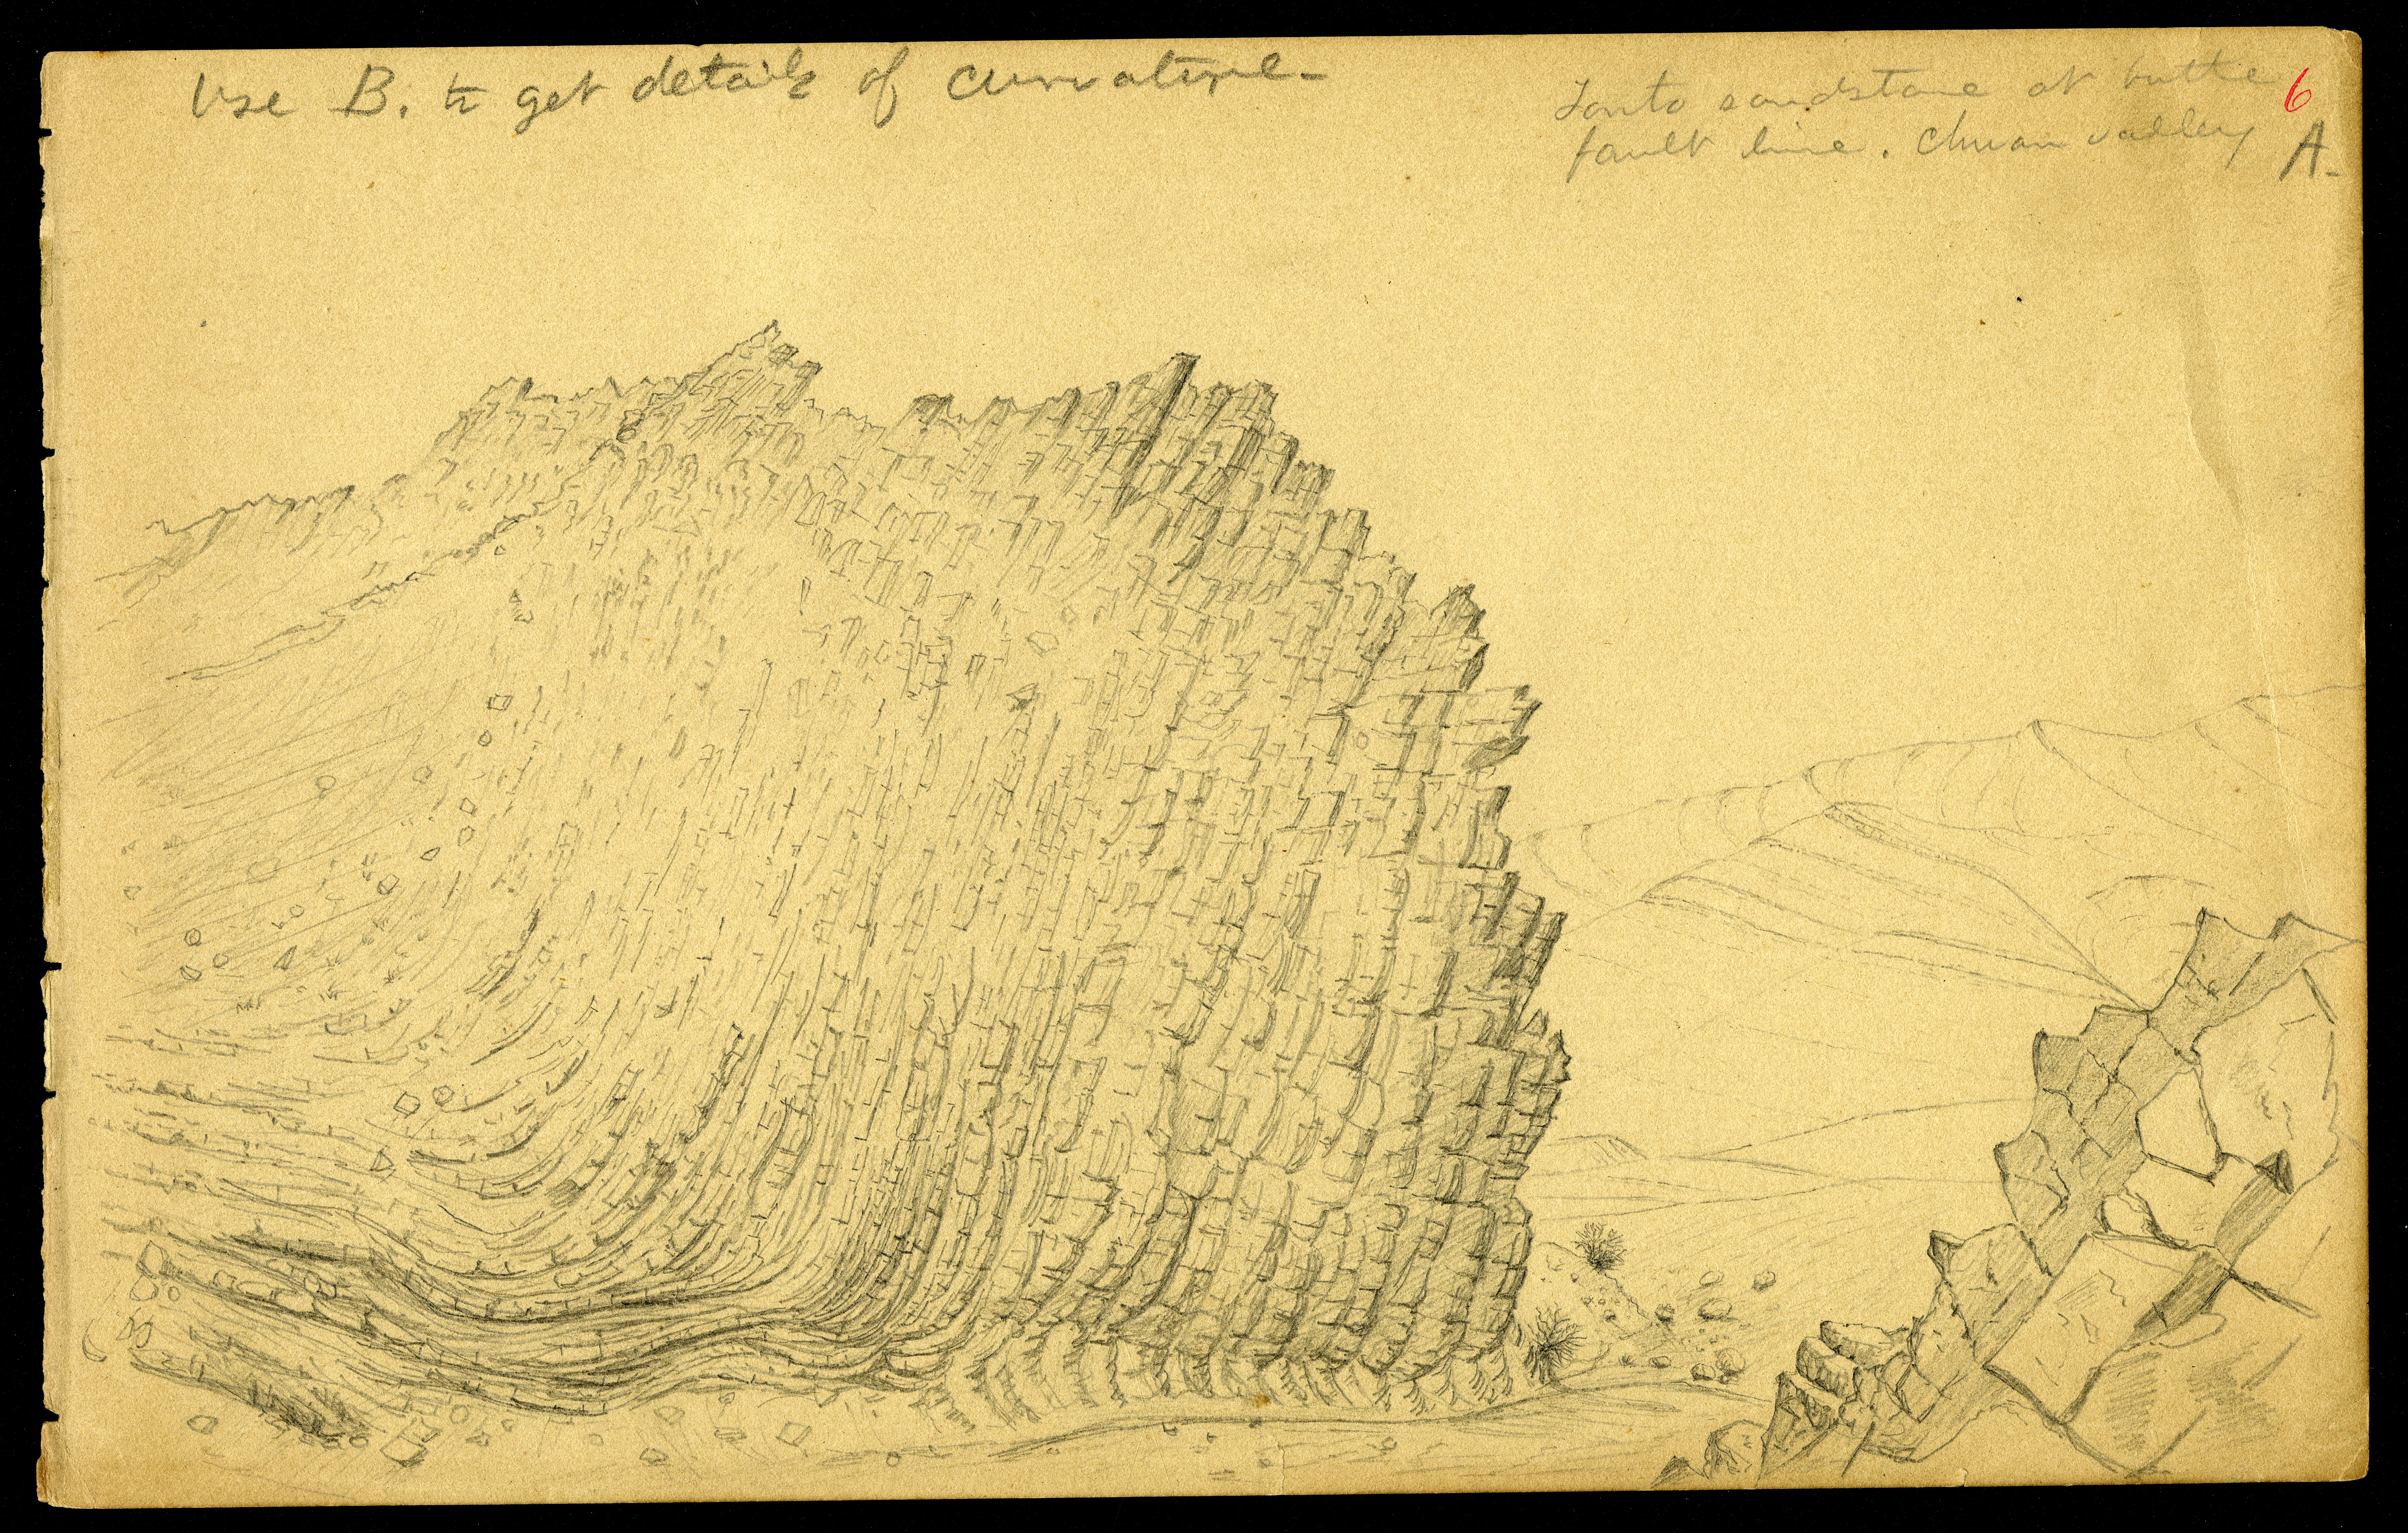 Sketch that documents the field work of Charles D. Walcott in the Chuar Valley of the Grand Canyon, 